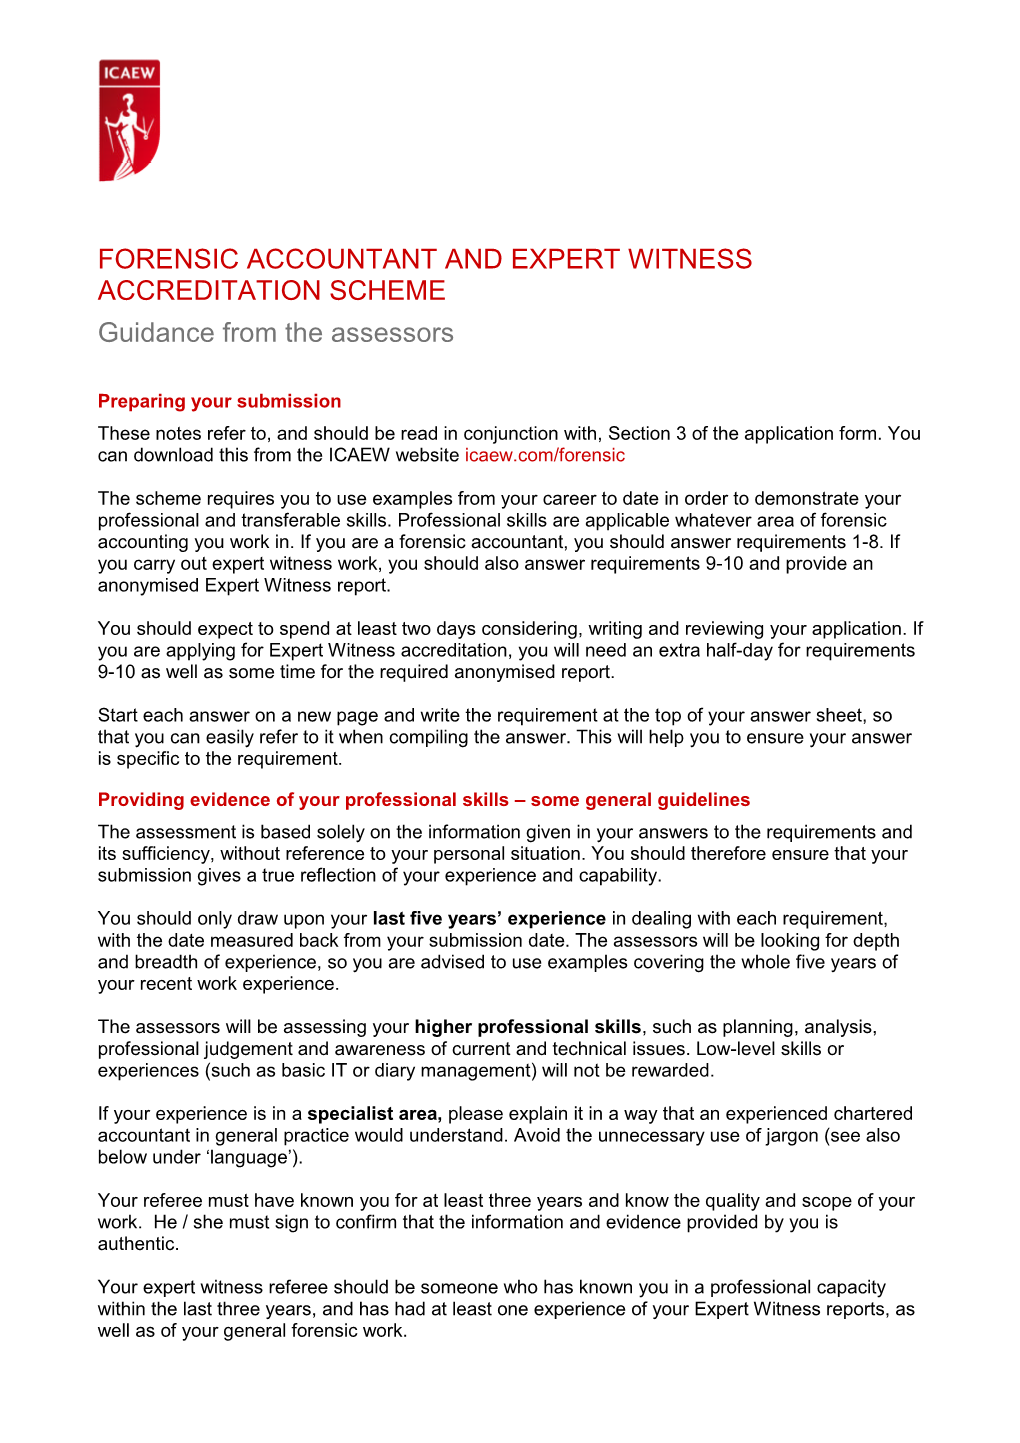 FORENSIC ACCOUNTANT and EXPERT WITNESS ACCREDITATION SCHEME Guidance from the Assessors